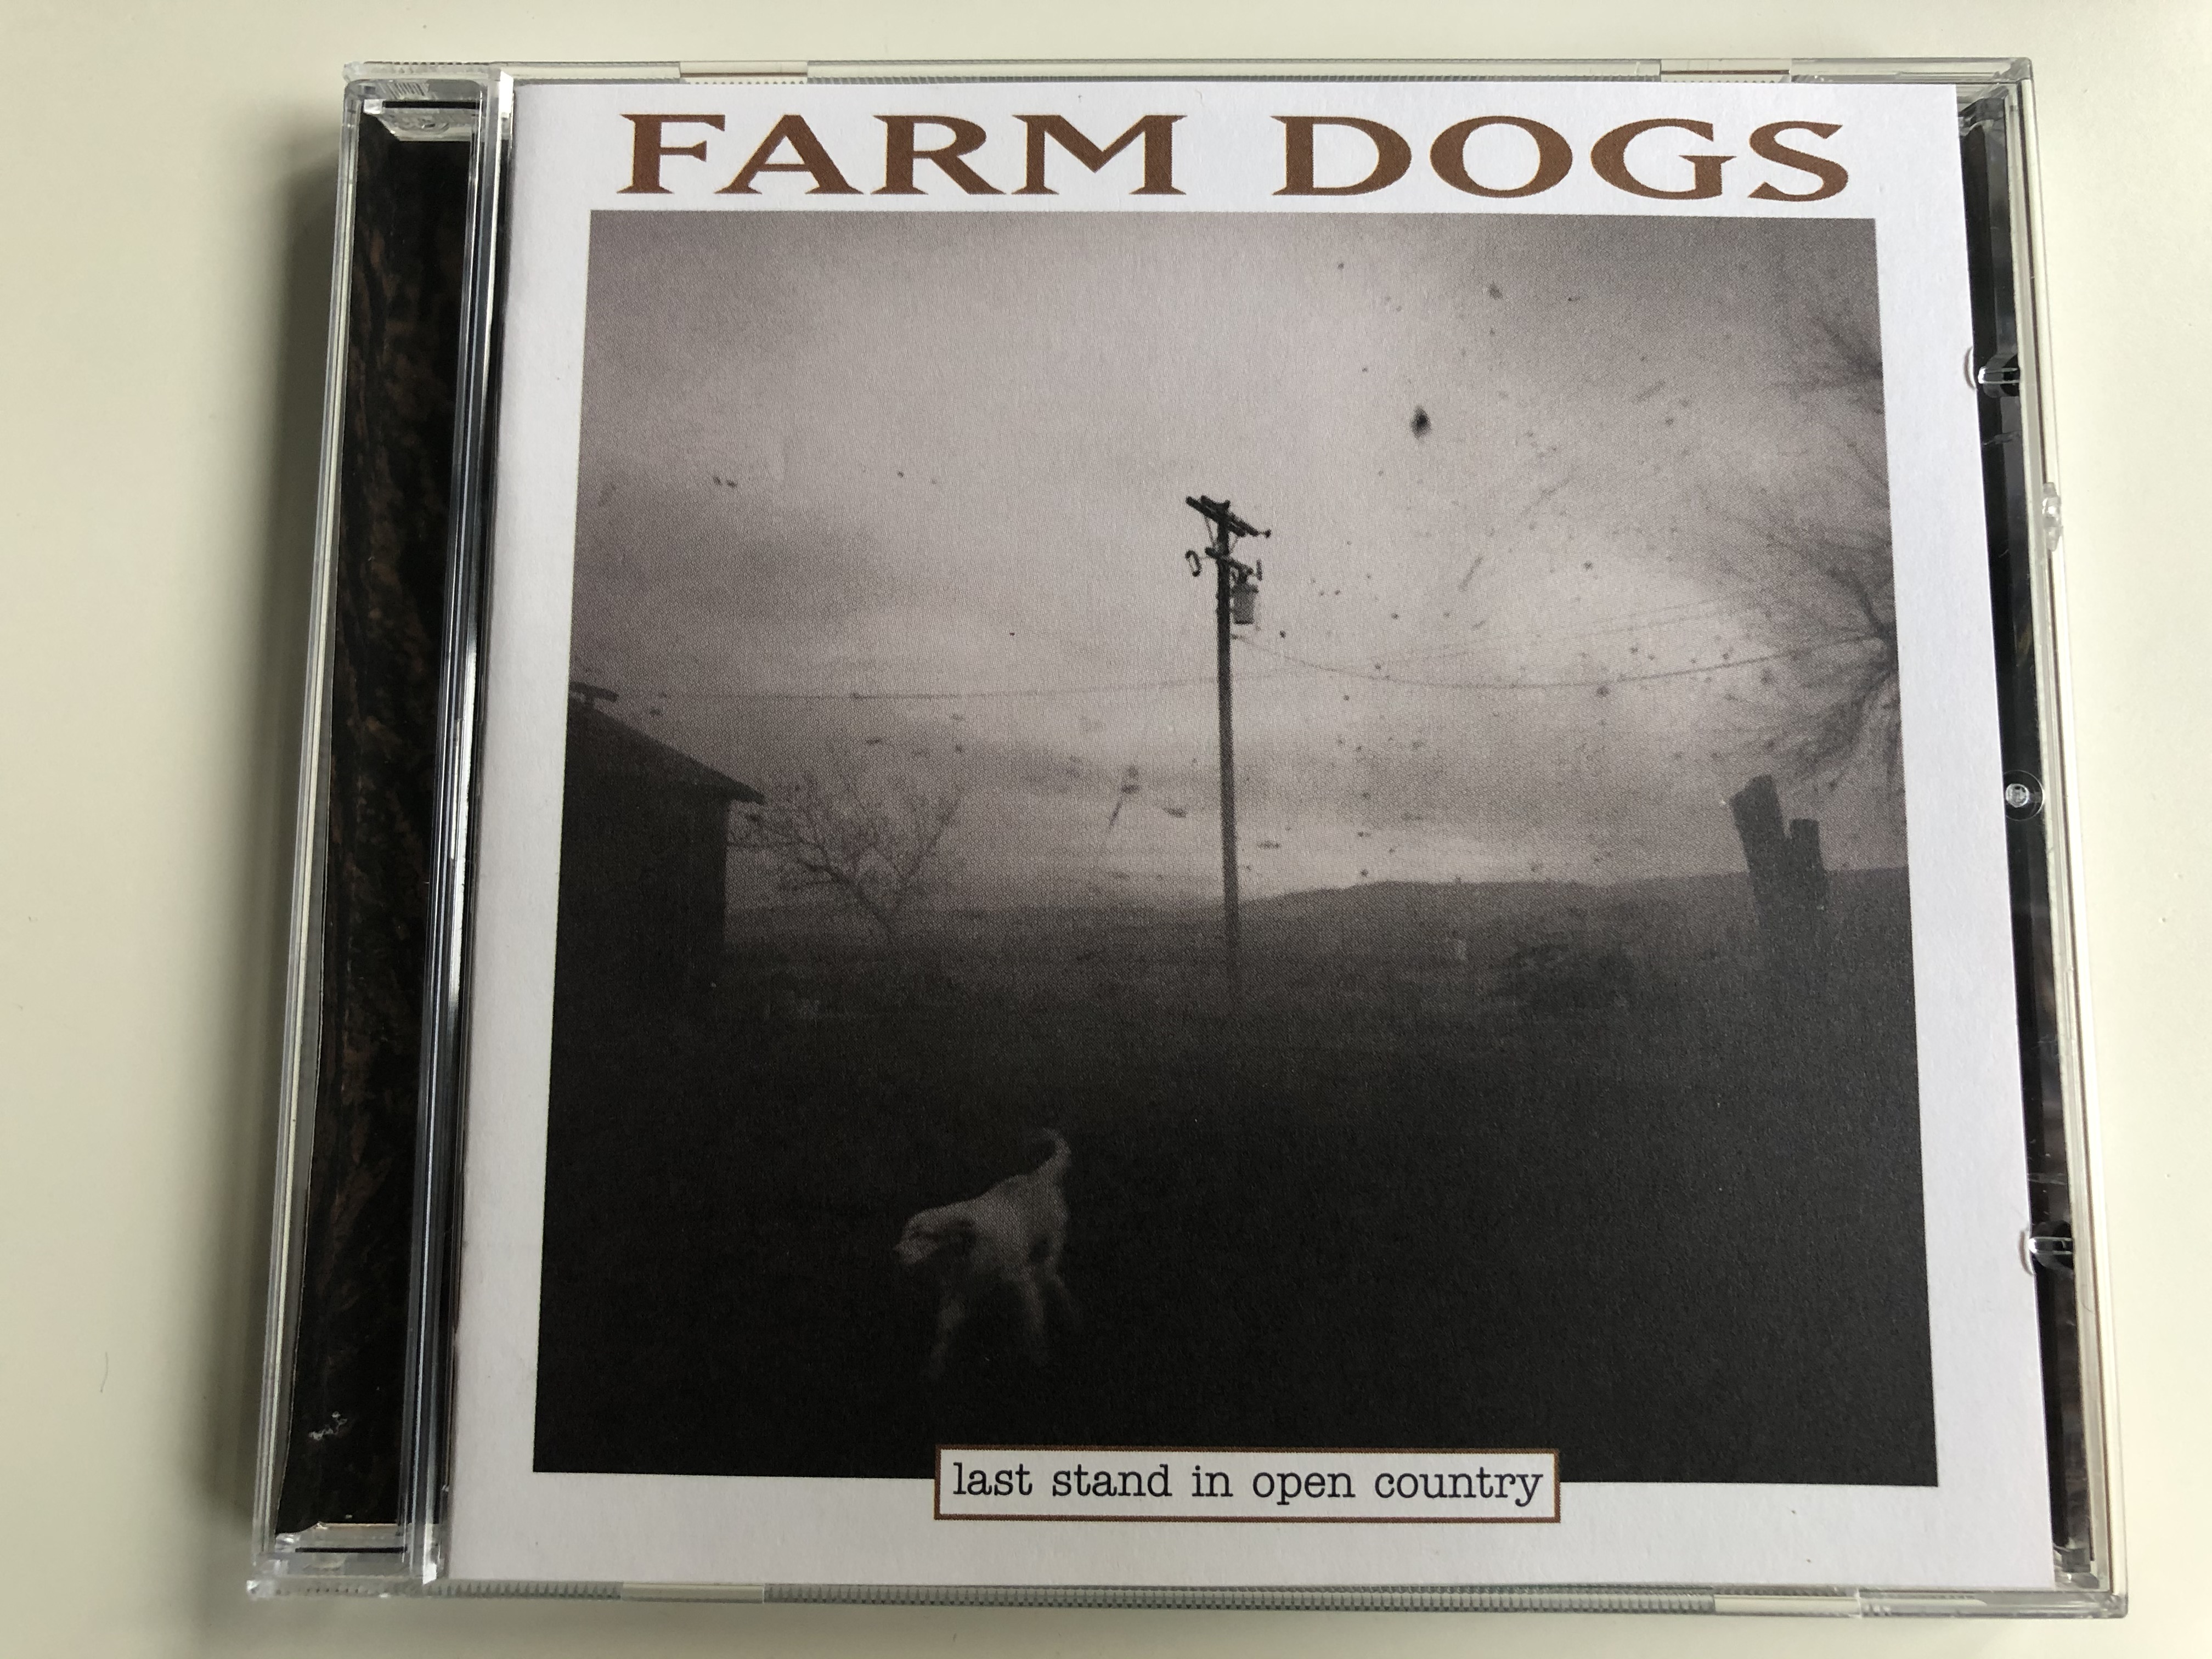 farm-dogs-last-stand-in-open-country-discovery-records-audio-cd-1996-1046-77046-2-1-.jpg